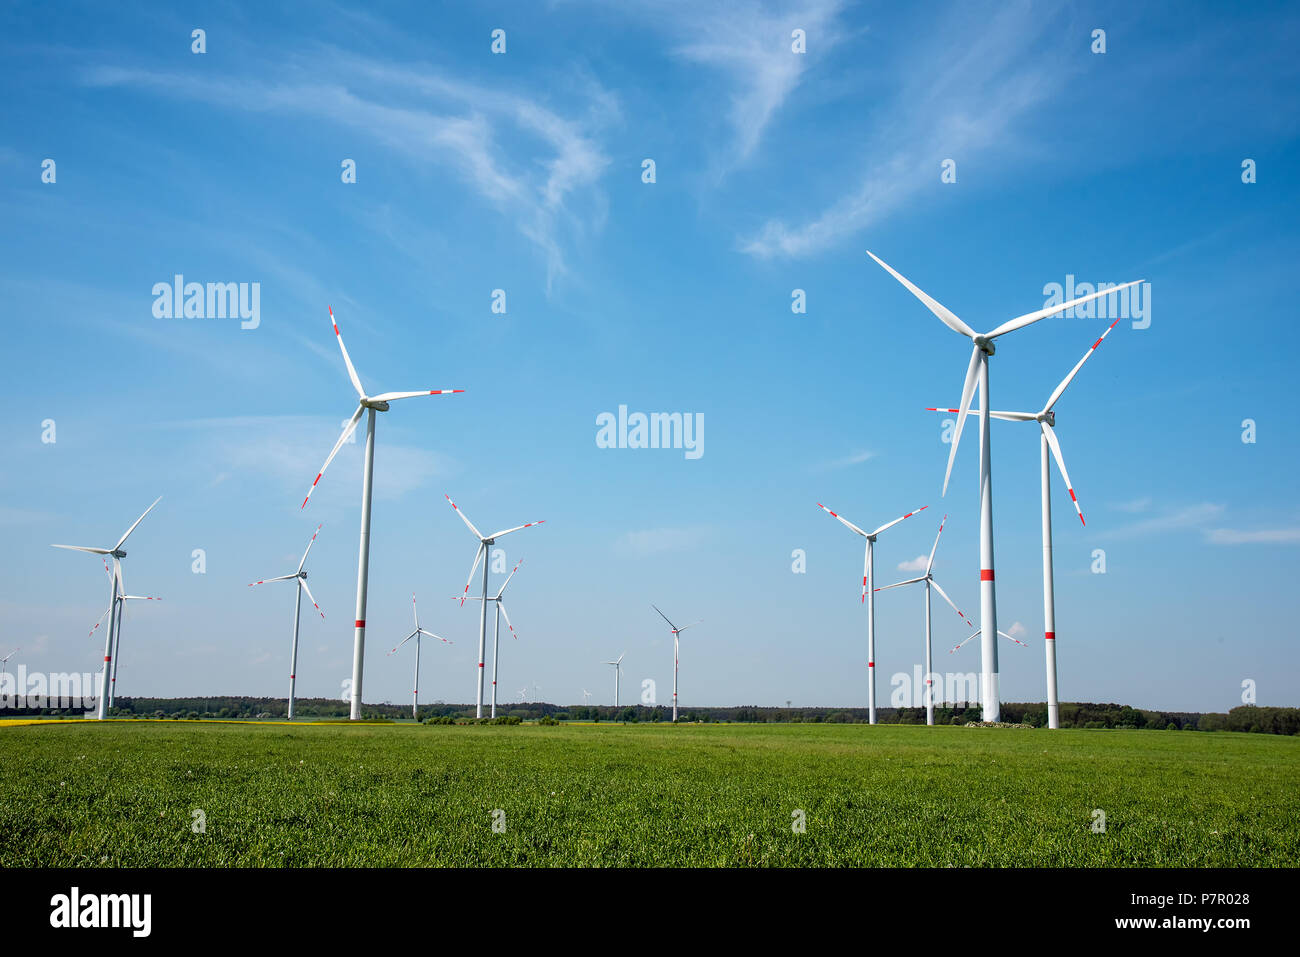 Modern wind energy generators on a sunny day seen in Germany Stock Photo